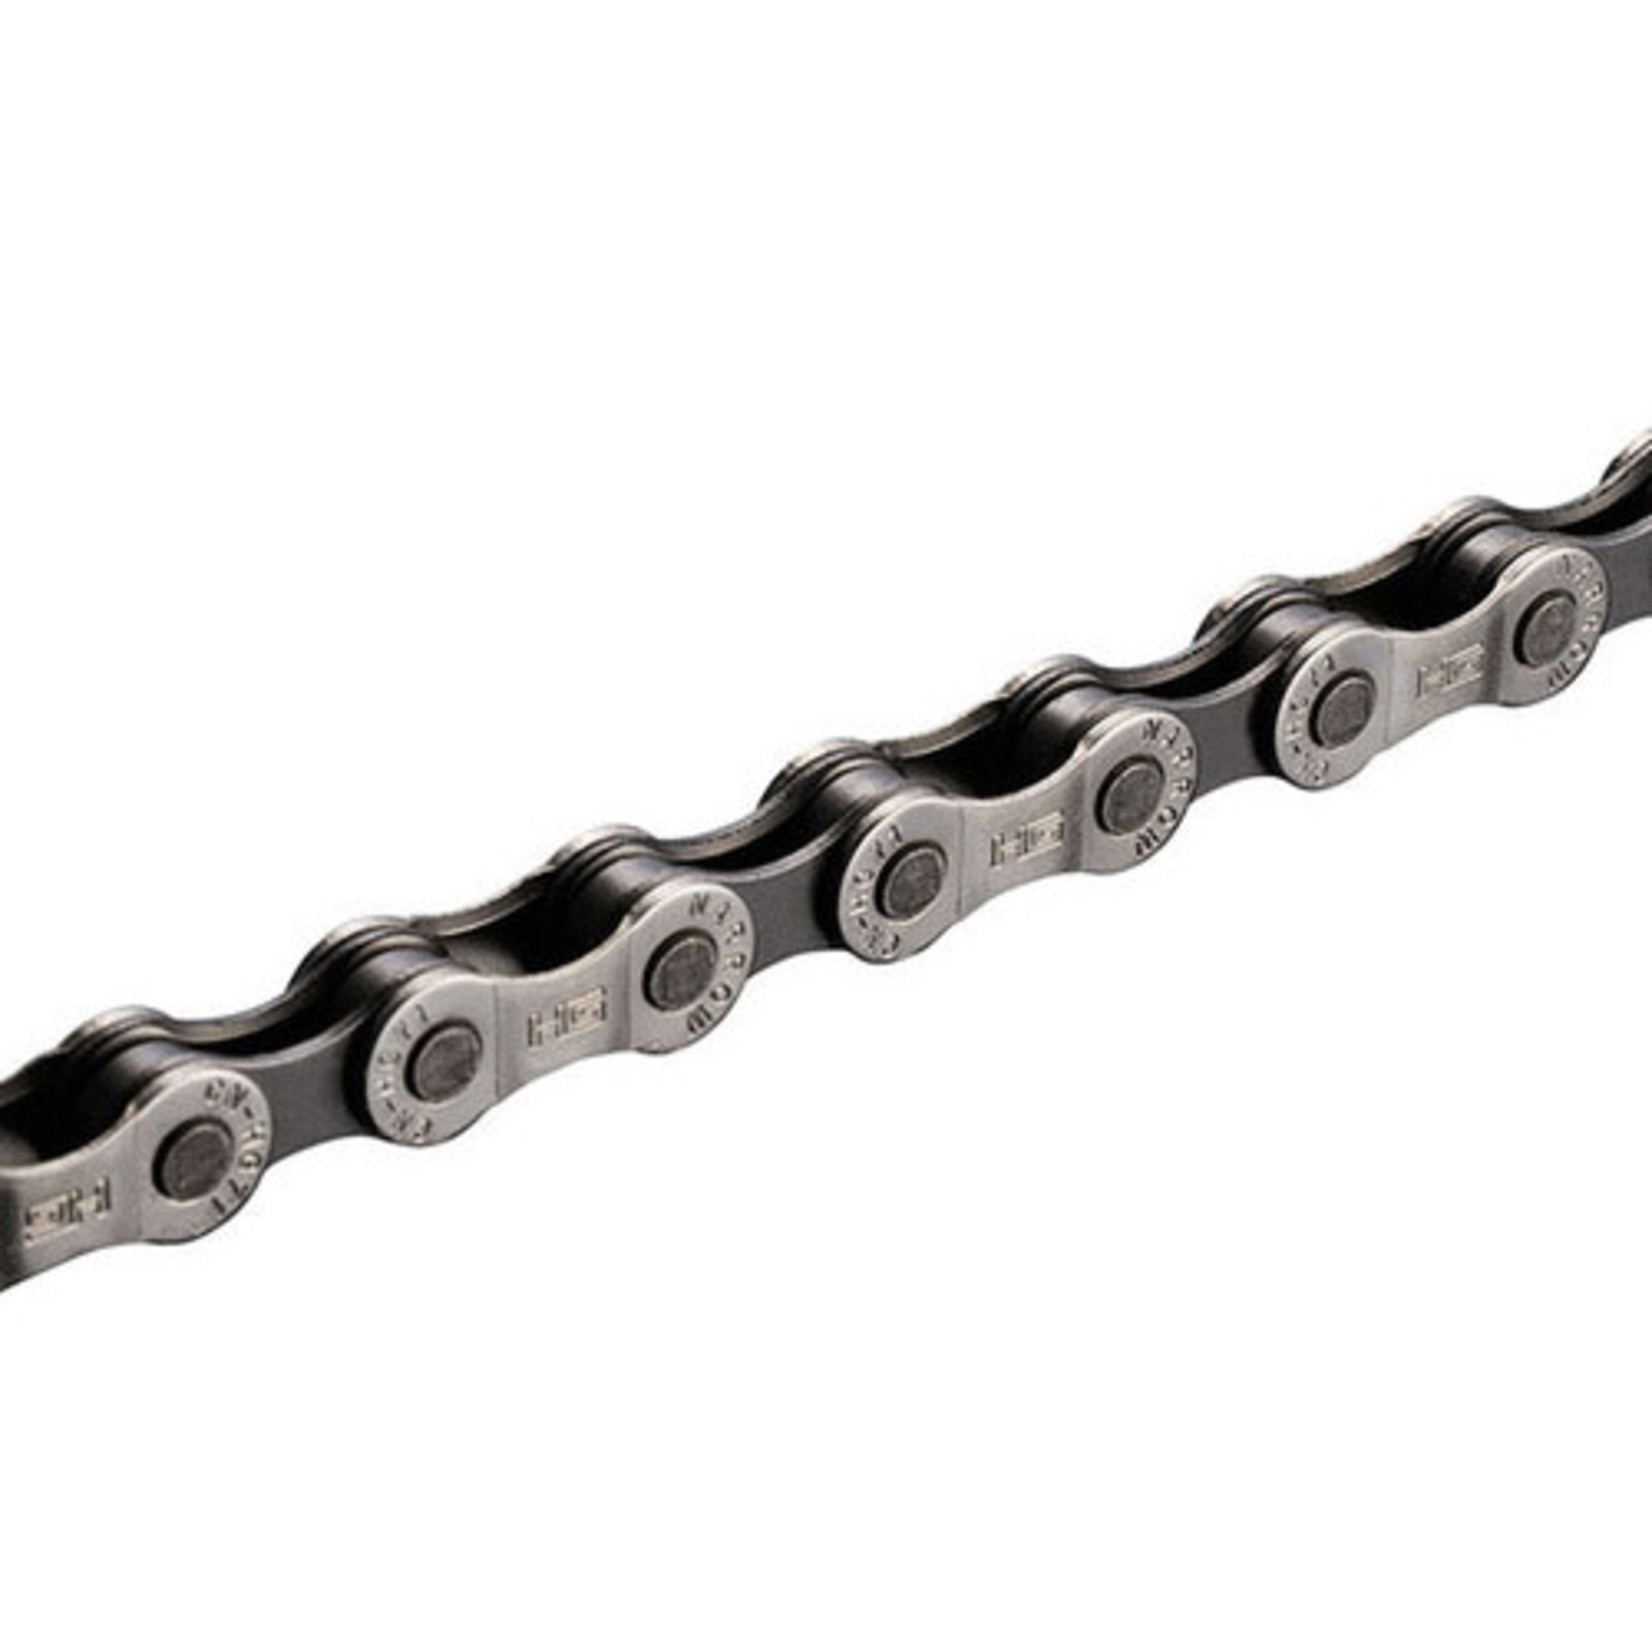 Shimano BICYCLE CHAIN, CN-HG71, 6/7/8 SPEED, 116 LINKS, W/SM-UG51 Quick Link